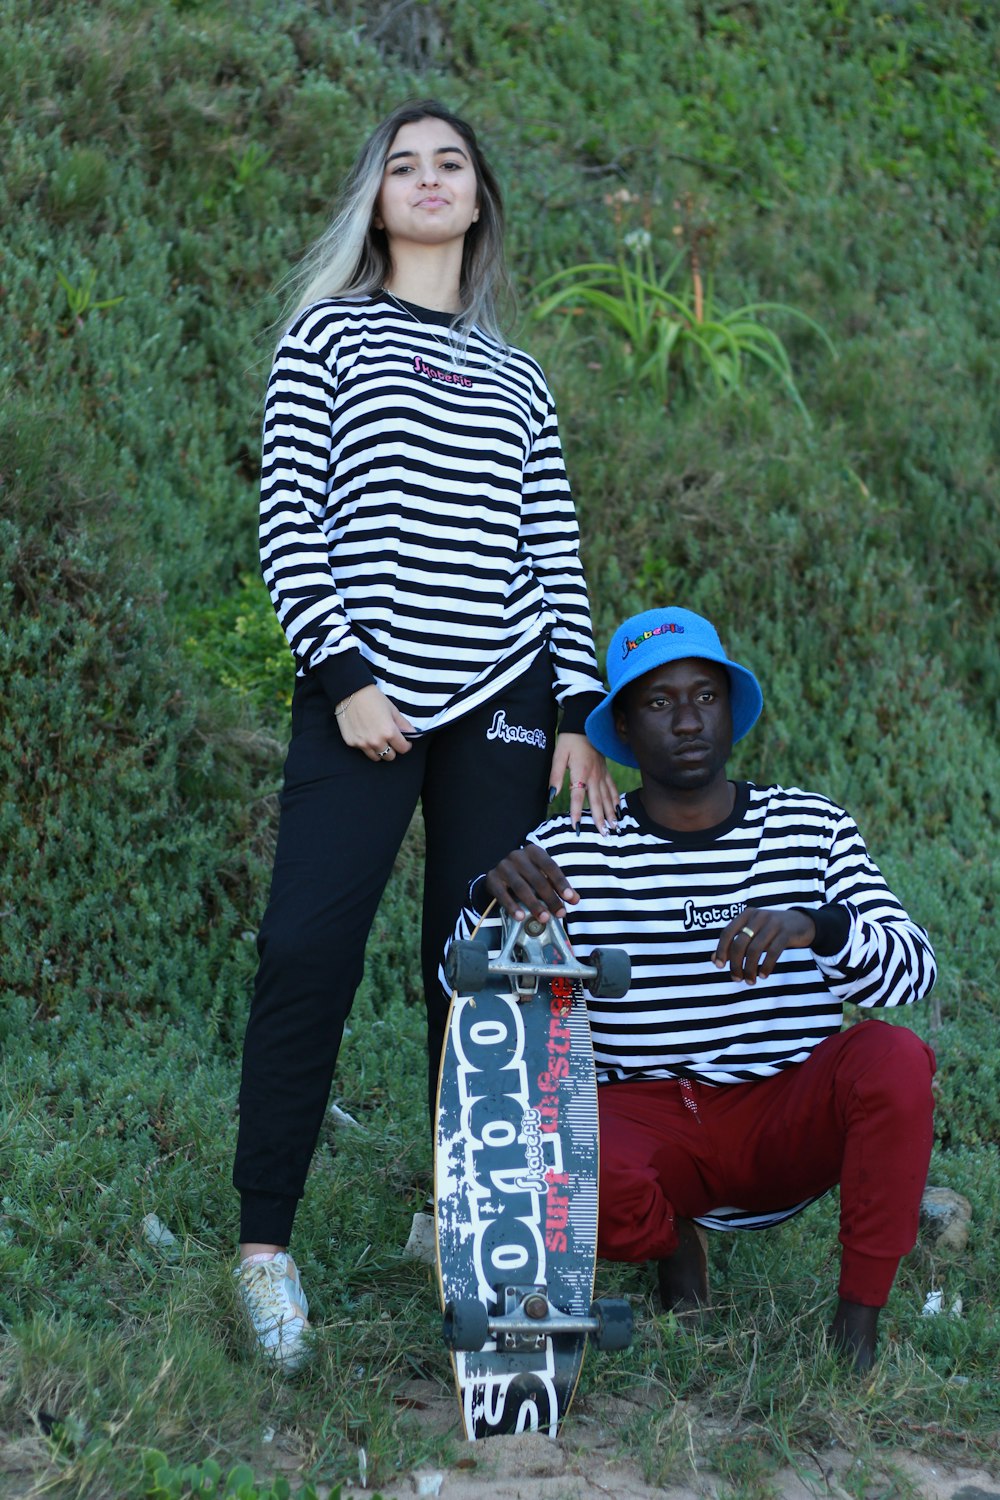 a couple of people standing next to a skateboard